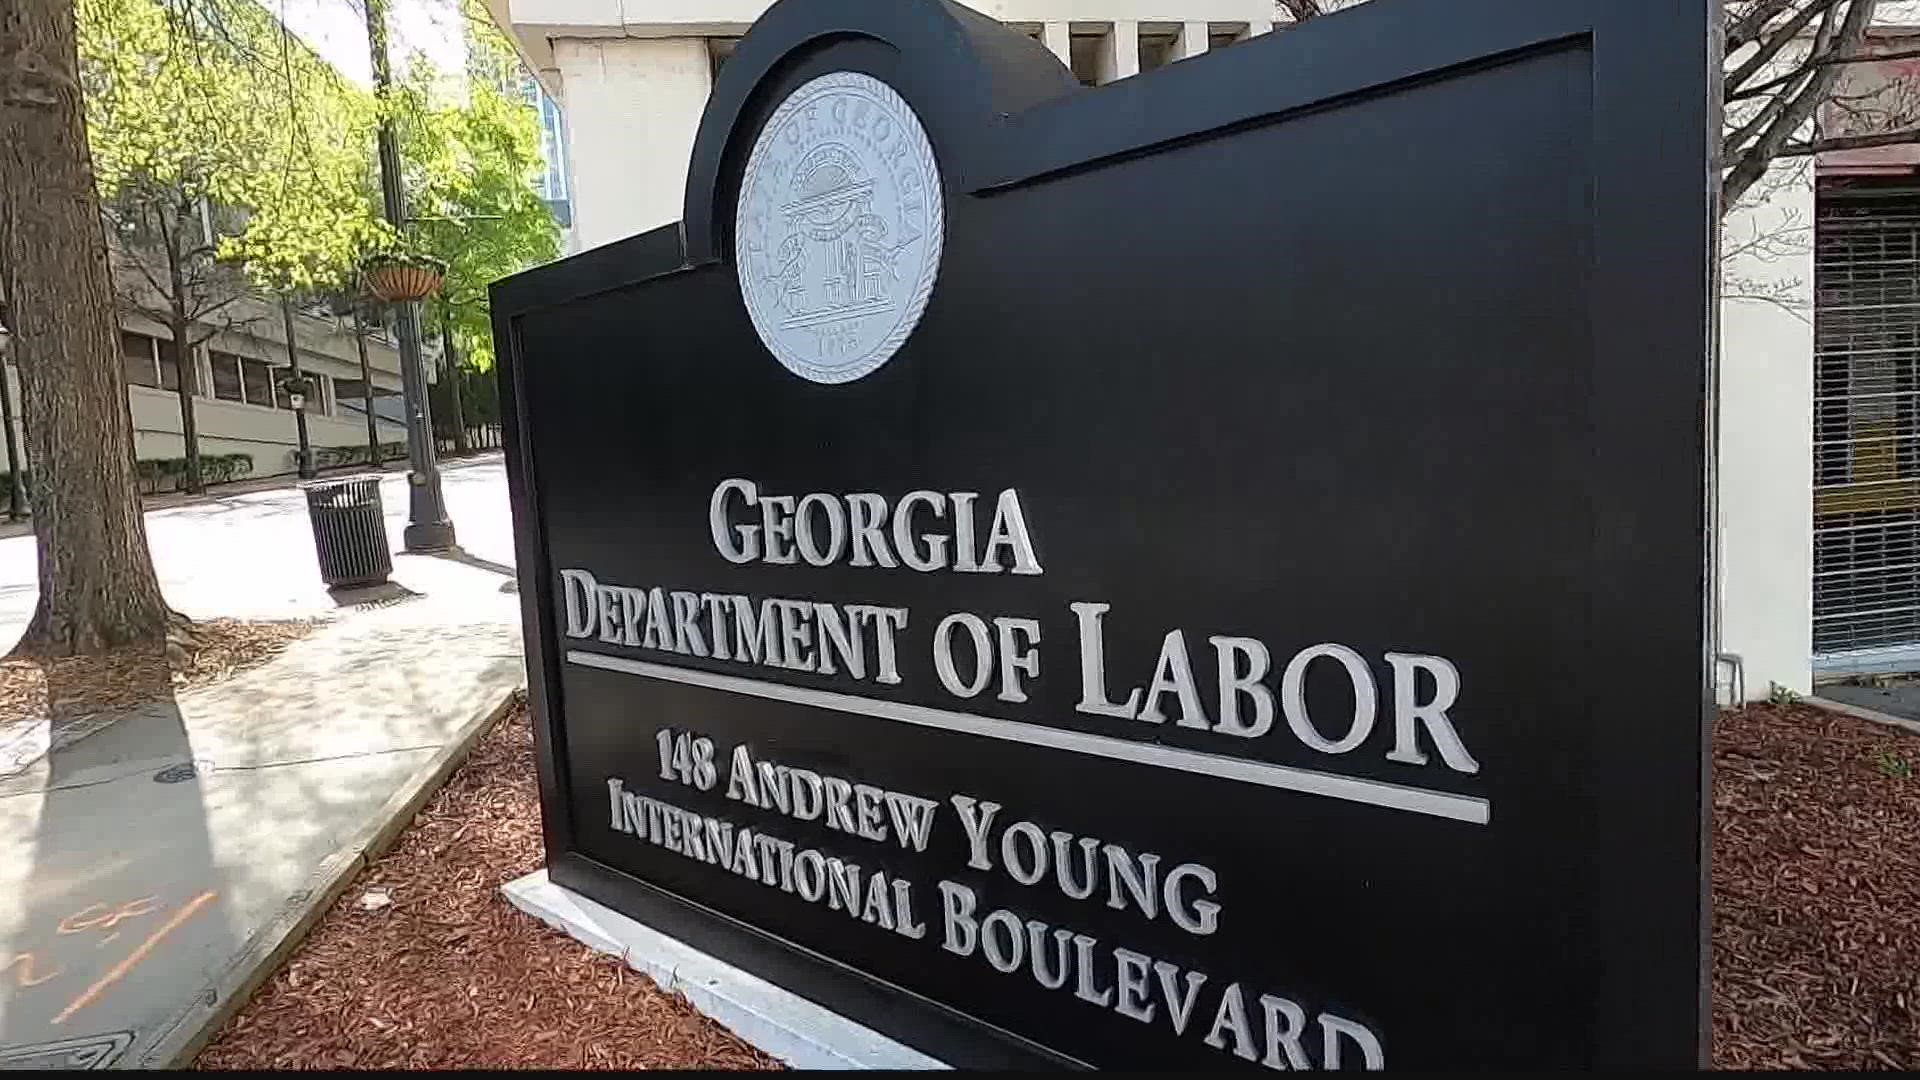 The department of labor is firing back after The Southern Poverty Law Center released a proposed settlement between the two parties.